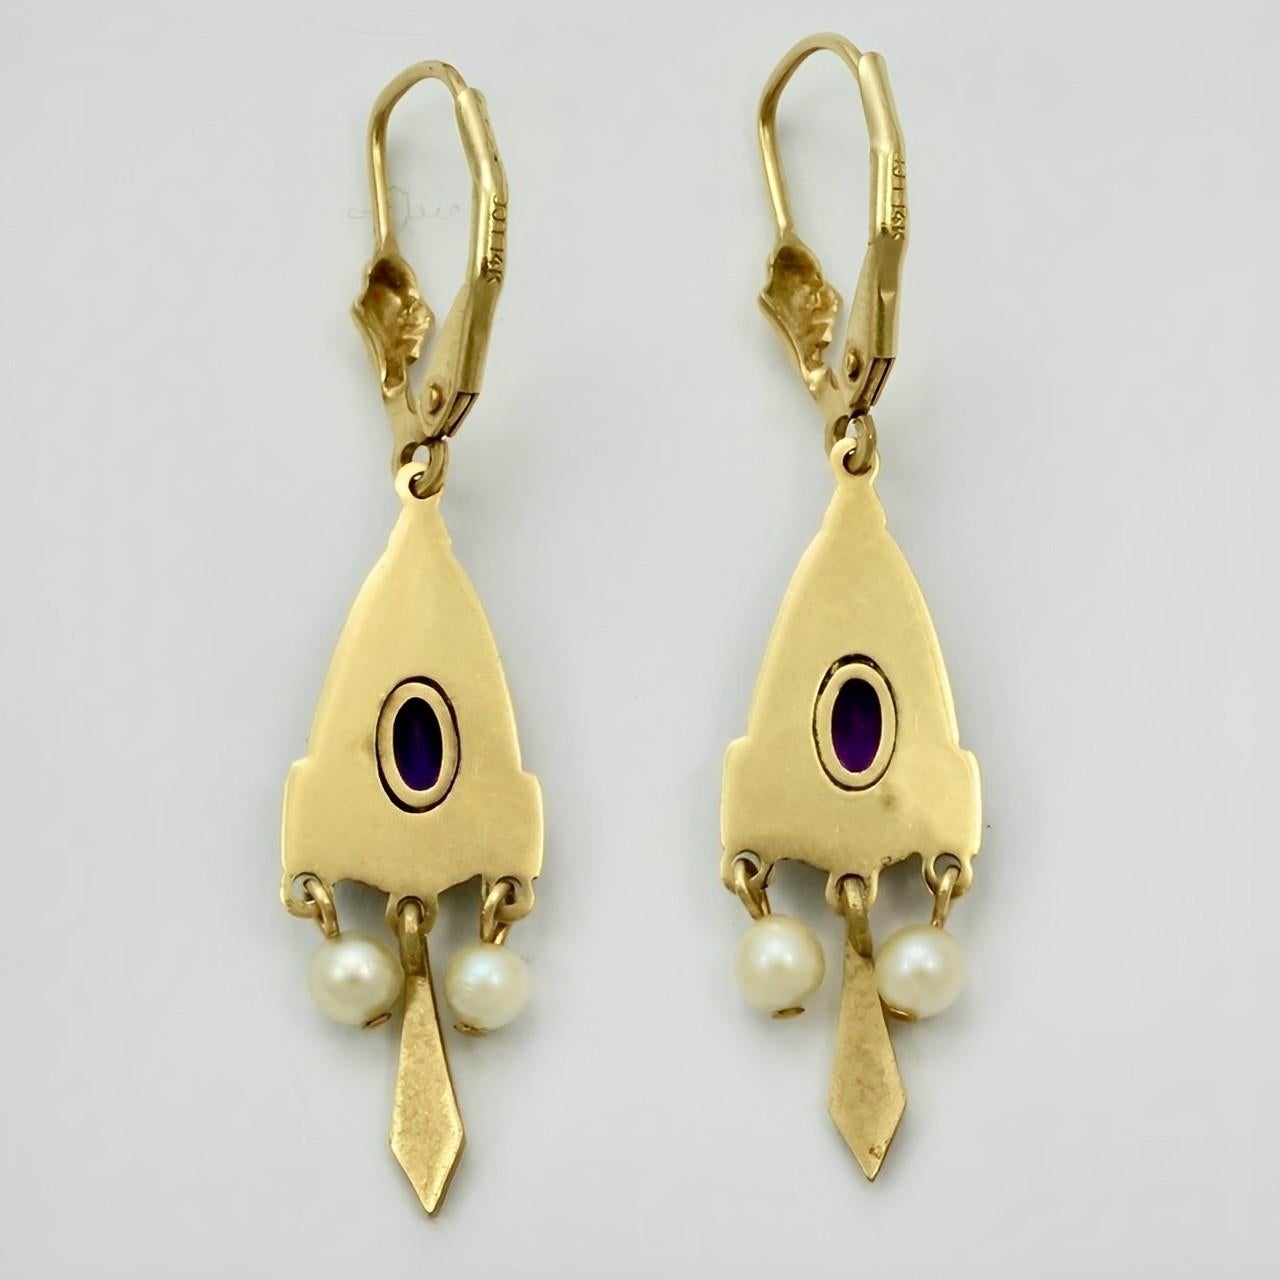 Beautiful 14K gold earrings with cultured pearls and purple stones. The ornate design is highlighted in black enamel. Length including the leverbacks 4.1 cm / 1.6 inches.

This is a lovely pair of Victorian style gold earrings with movement..